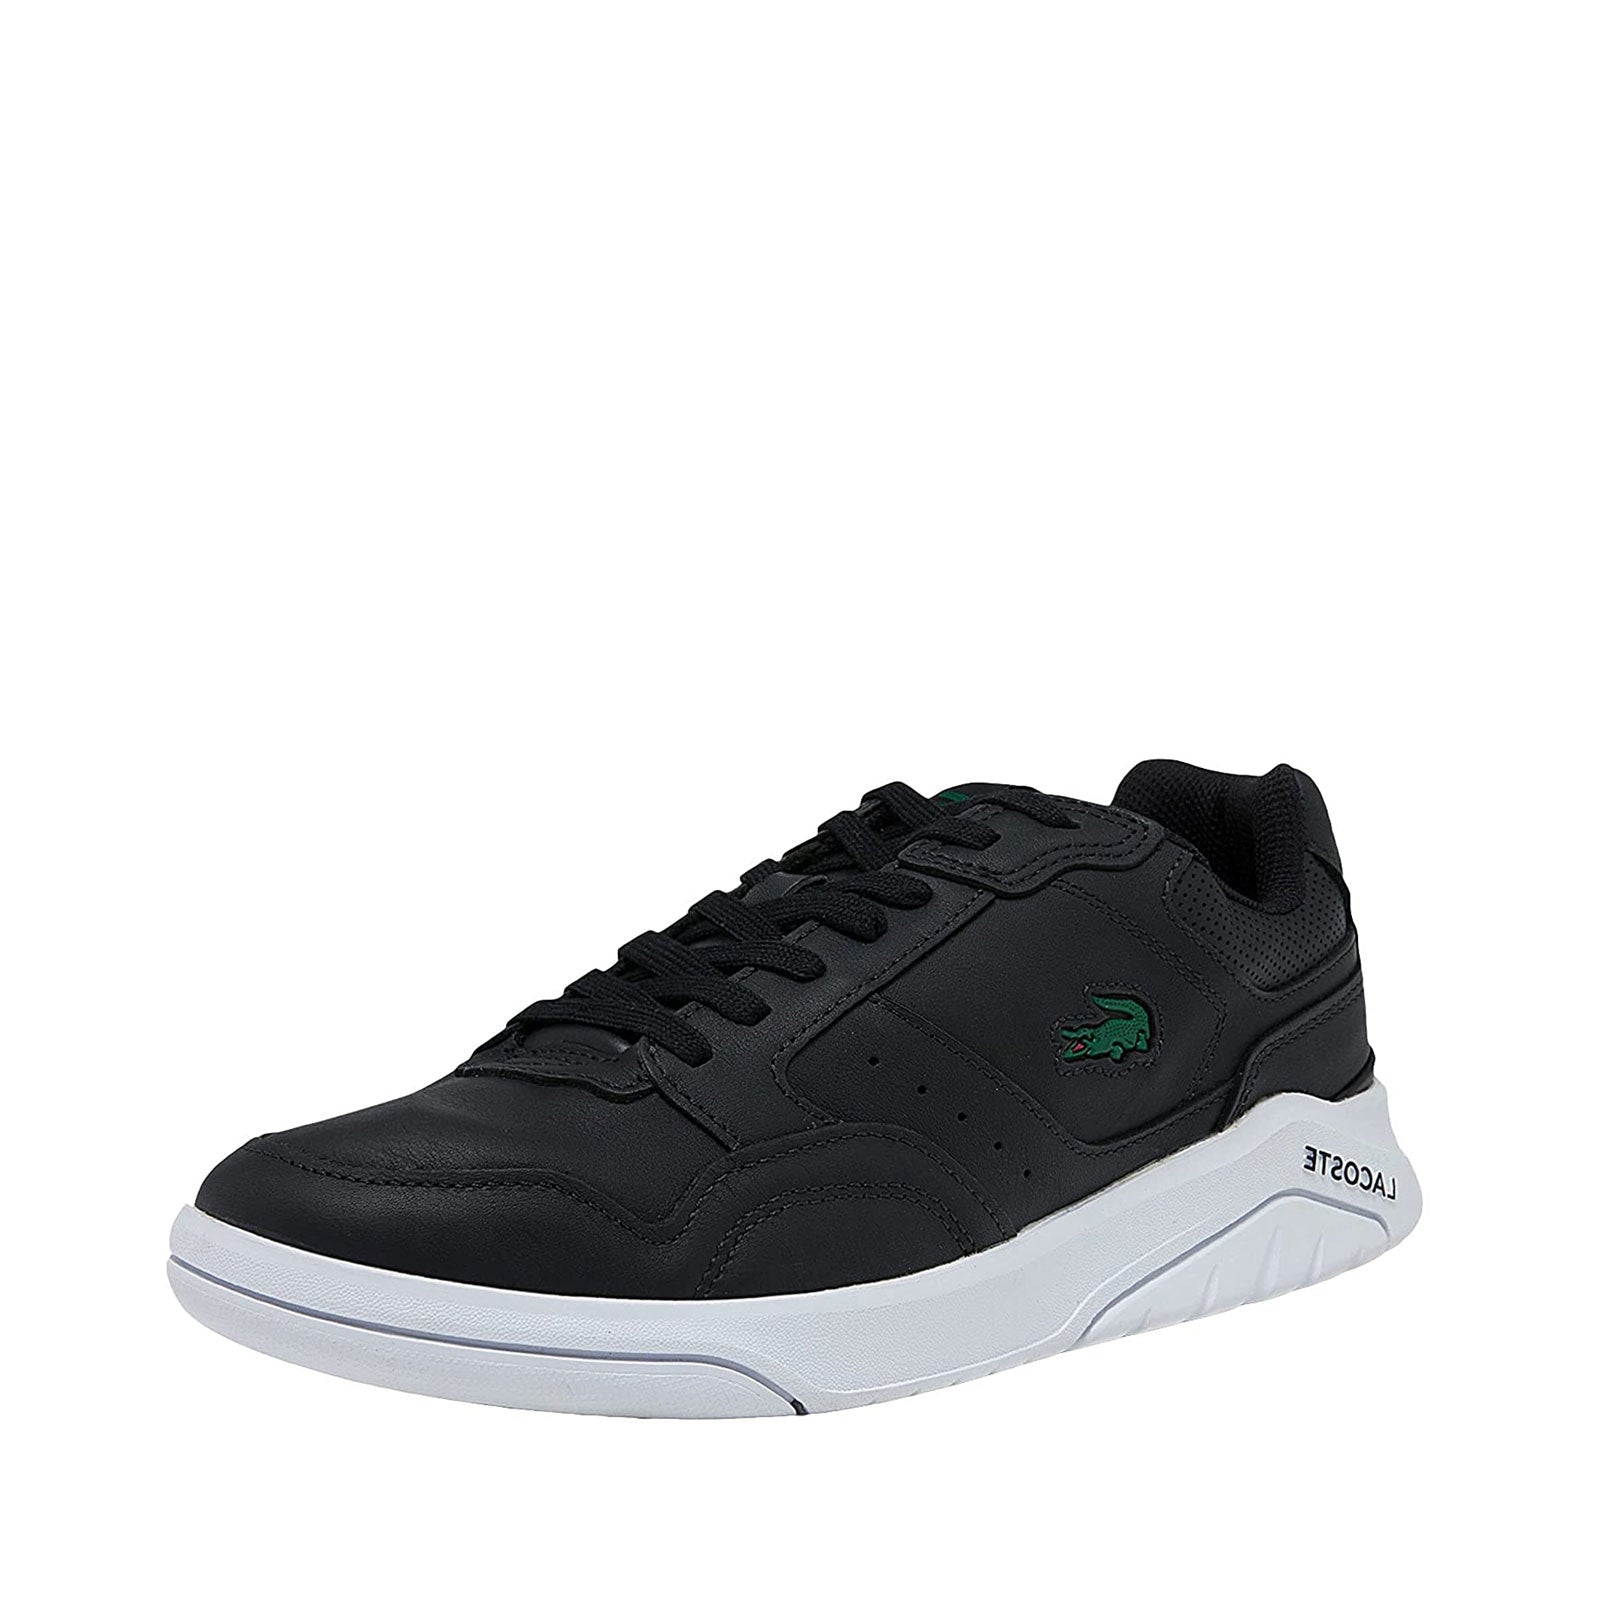 Men's Shoes Lacoste GAME ADVANCE 0721 Casual Leather Sneakers